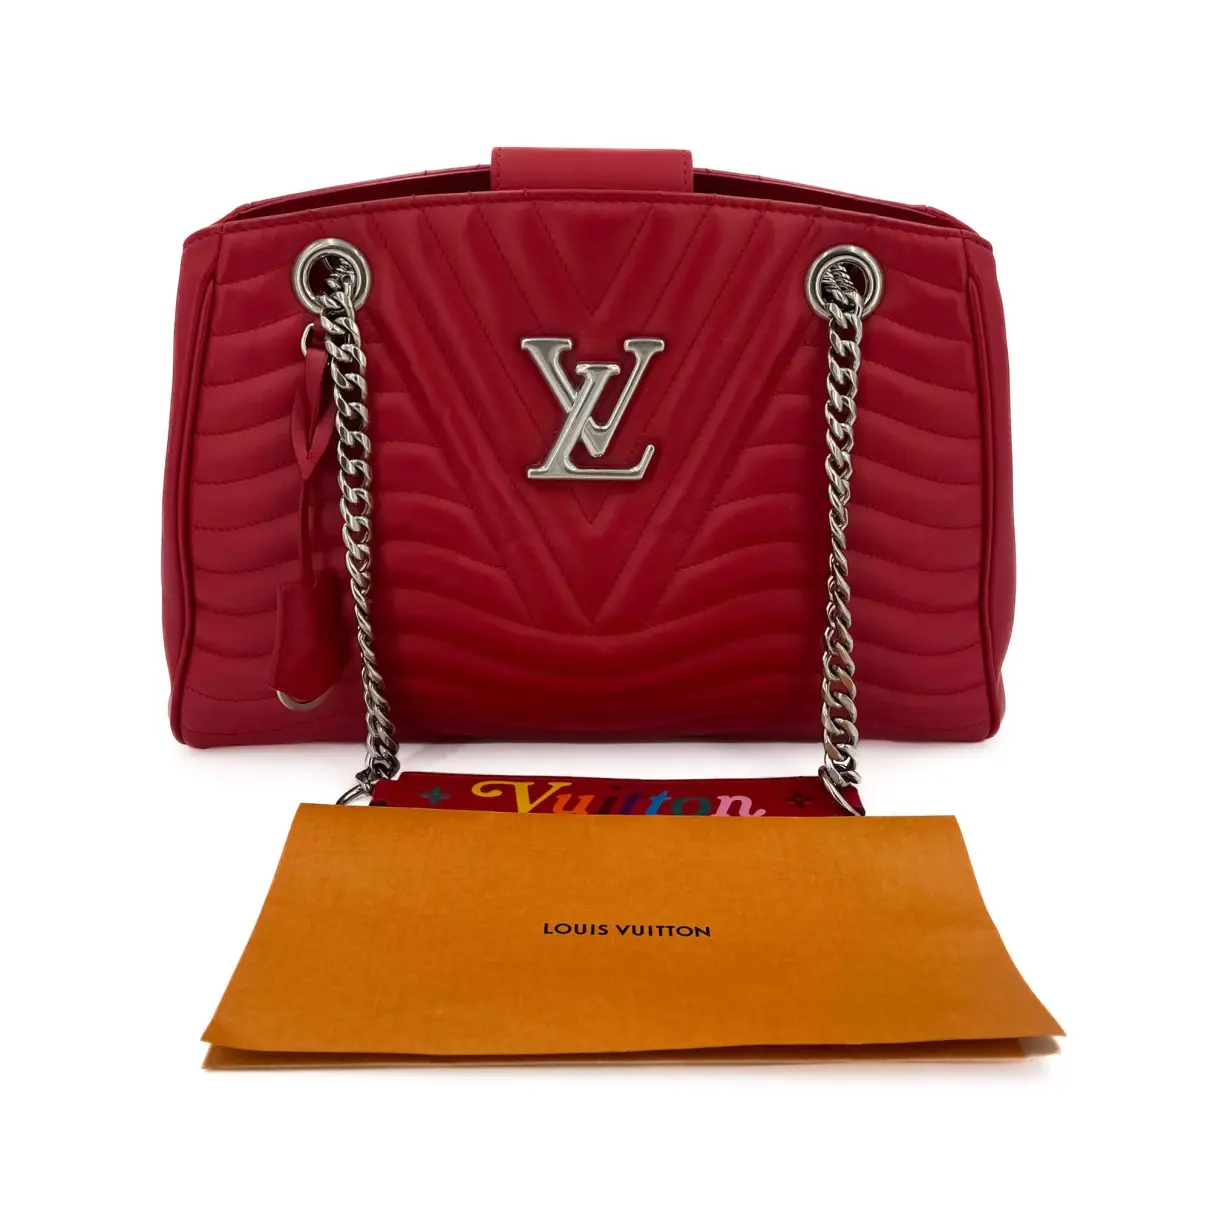 New Wave leather tote Louis Vuitton